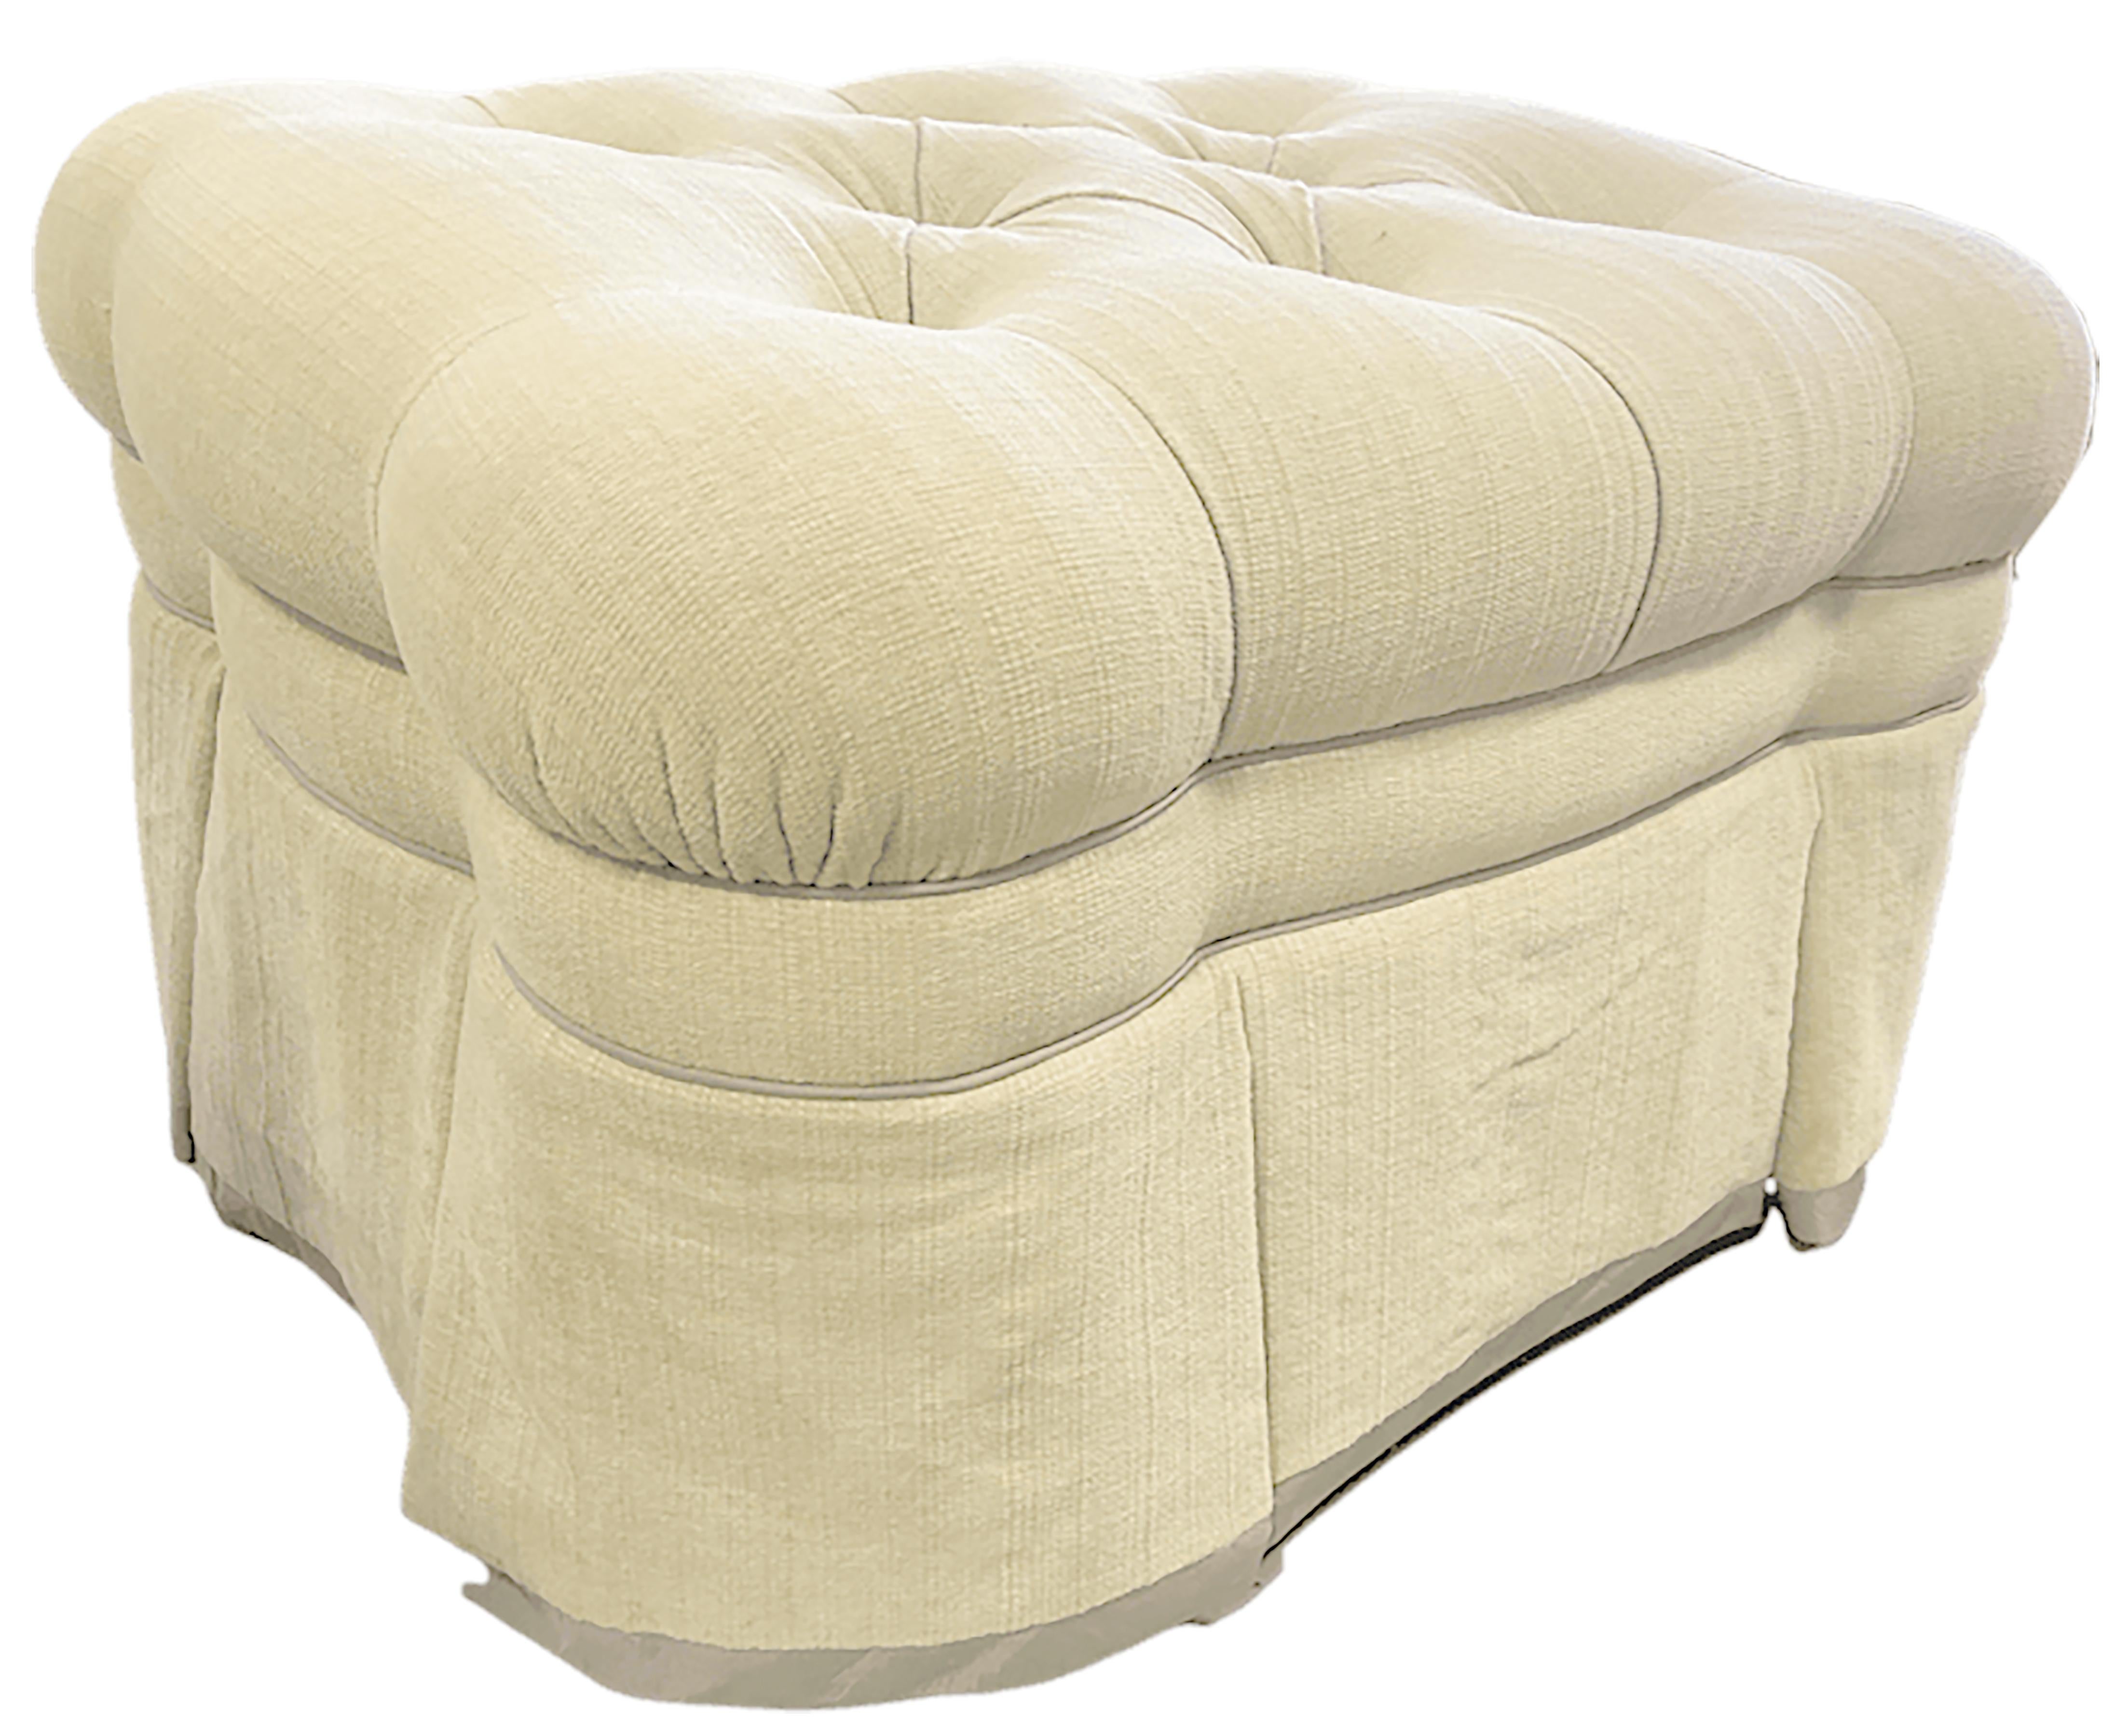 A luxurious white tufted ottoman with round buttons. The extra attention paid to expertly layered delicately upholstered, which means an increased longevity of the supportive material for this furniture piece. The body of the ottoman is made up of